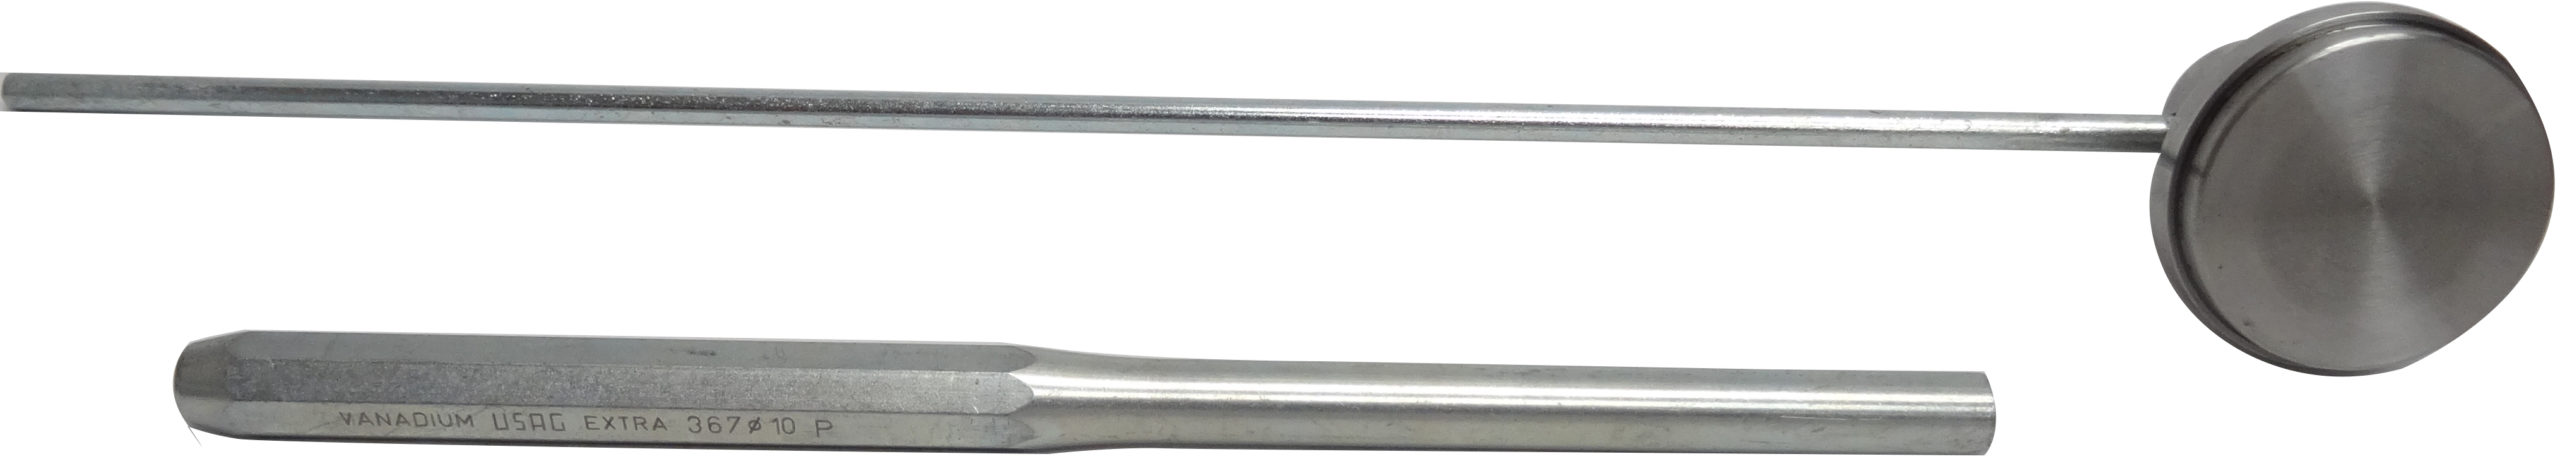 Inlet Check Valve Seat Removal Tool - MW | MK | MKS | LS Series